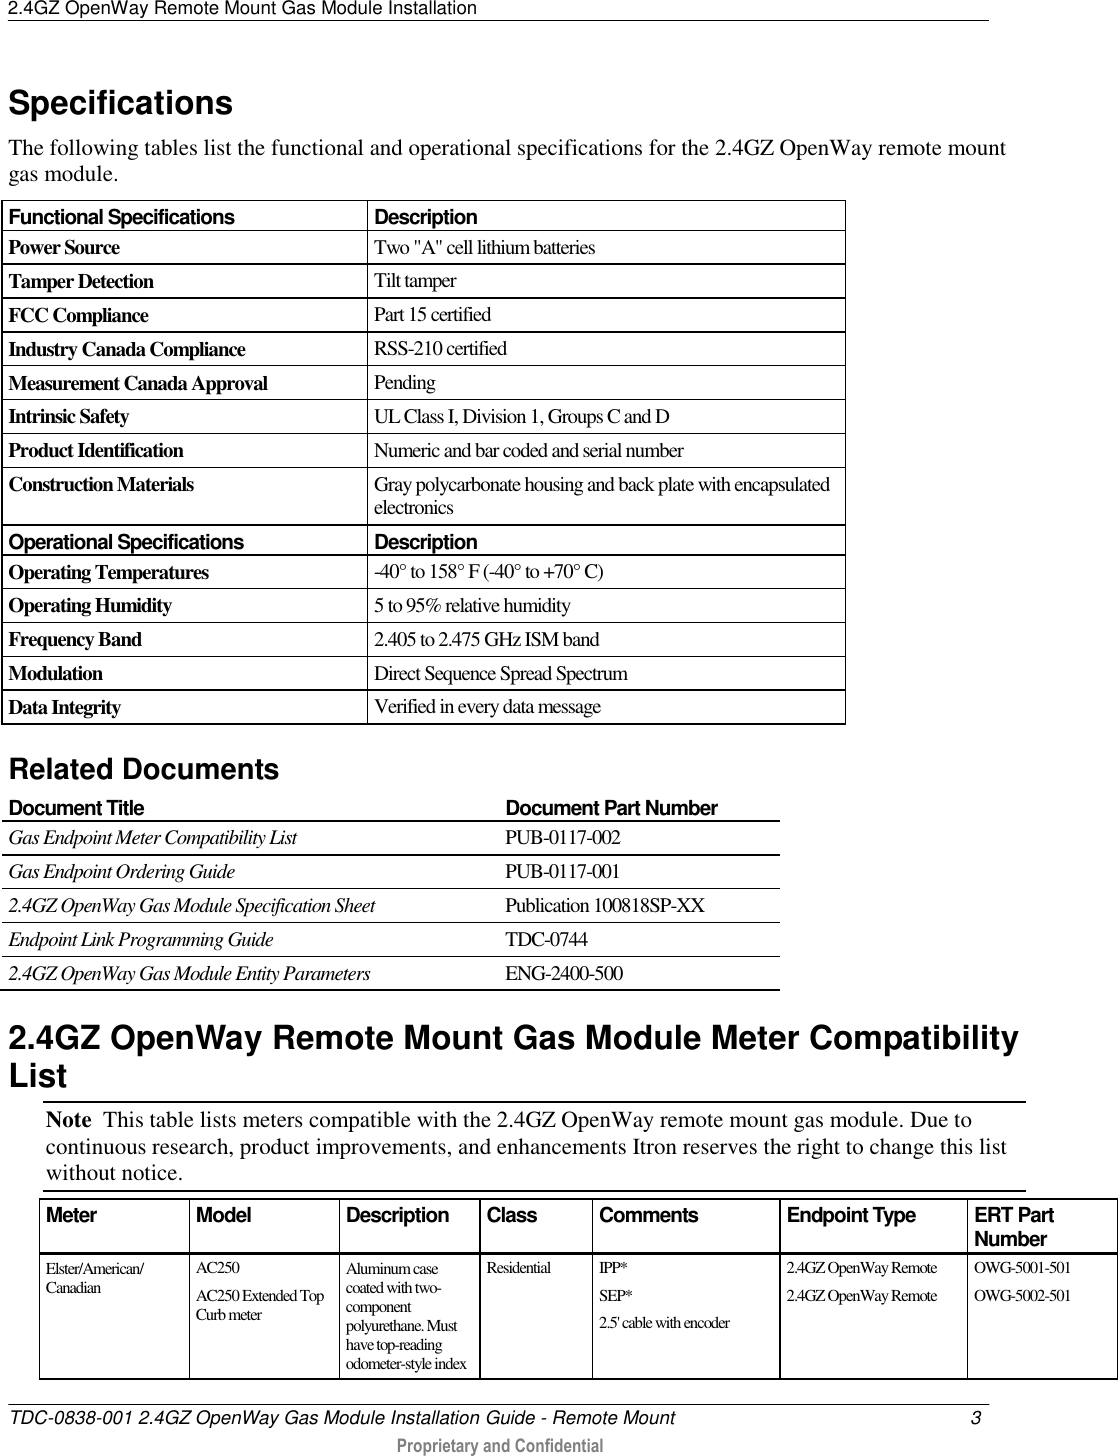 2.4GZ OpenWay Remote Mount Gas Module Installation   TDC-0838-001 2.4GZ OpenWay Gas Module Installation Guide - Remote Mount  3   Proprietary and Confidential     Specifications The following tables list the functional and operational specifications for the 2.4GZ OpenWay remote mount gas module.  Functional Specifications Description Power Source Two &quot;A&quot; cell lithium batteries Tamper Detection Tilt tamper FCC Compliance Part 15 certified Industry Canada Compliance RSS-210 certified Measurement Canada Approval Pending Intrinsic Safety UL Class I, Division 1, Groups C and D Product Identification Numeric and bar coded and serial number Construction Materials Gray polycarbonate housing and back plate with encapsulated electronics Operational Specifications Description Operating Temperatures -40° to 158° F (-40° to +70° C) Operating Humidity 5 to 95% relative humidity Frequency Band 2.405 to 2.475 GHz ISM band Modulation Direct Sequence Spread Spectrum Data Integrity Verified in every data message  Related Documents Document Title Document Part Number Gas Endpoint Meter Compatibility List PUB-0117-002 Gas Endpoint Ordering Guide PUB-0117-001 2.4GZ OpenWay Gas Module Specification Sheet Publication 100818SP-XX Endpoint Link Programming Guide TDC-0744 2.4GZ OpenWay Gas Module Entity Parameters ENG-2400-500  2.4GZ OpenWay Remote Mount Gas Module Meter Compatibility List Note  This table lists meters compatible with the 2.4GZ OpenWay remote mount gas module. Due to continuous research, product improvements, and enhancements Itron reserves the right to change this list without notice. Meter Model Description Class Comments Endpoint Type ERT Part Number Elster/American/ Canadian AC250 AC250 Extended Top Curb meter Aluminum case coated with two-component polyurethane. Must have top-reading odometer-style index  Residential IPP* SEP* 2.5&apos; cable with encoder  2.4GZ OpenWay Remote 2.4GZ OpenWay Remote OWG-5001-501 OWG-5002-501 